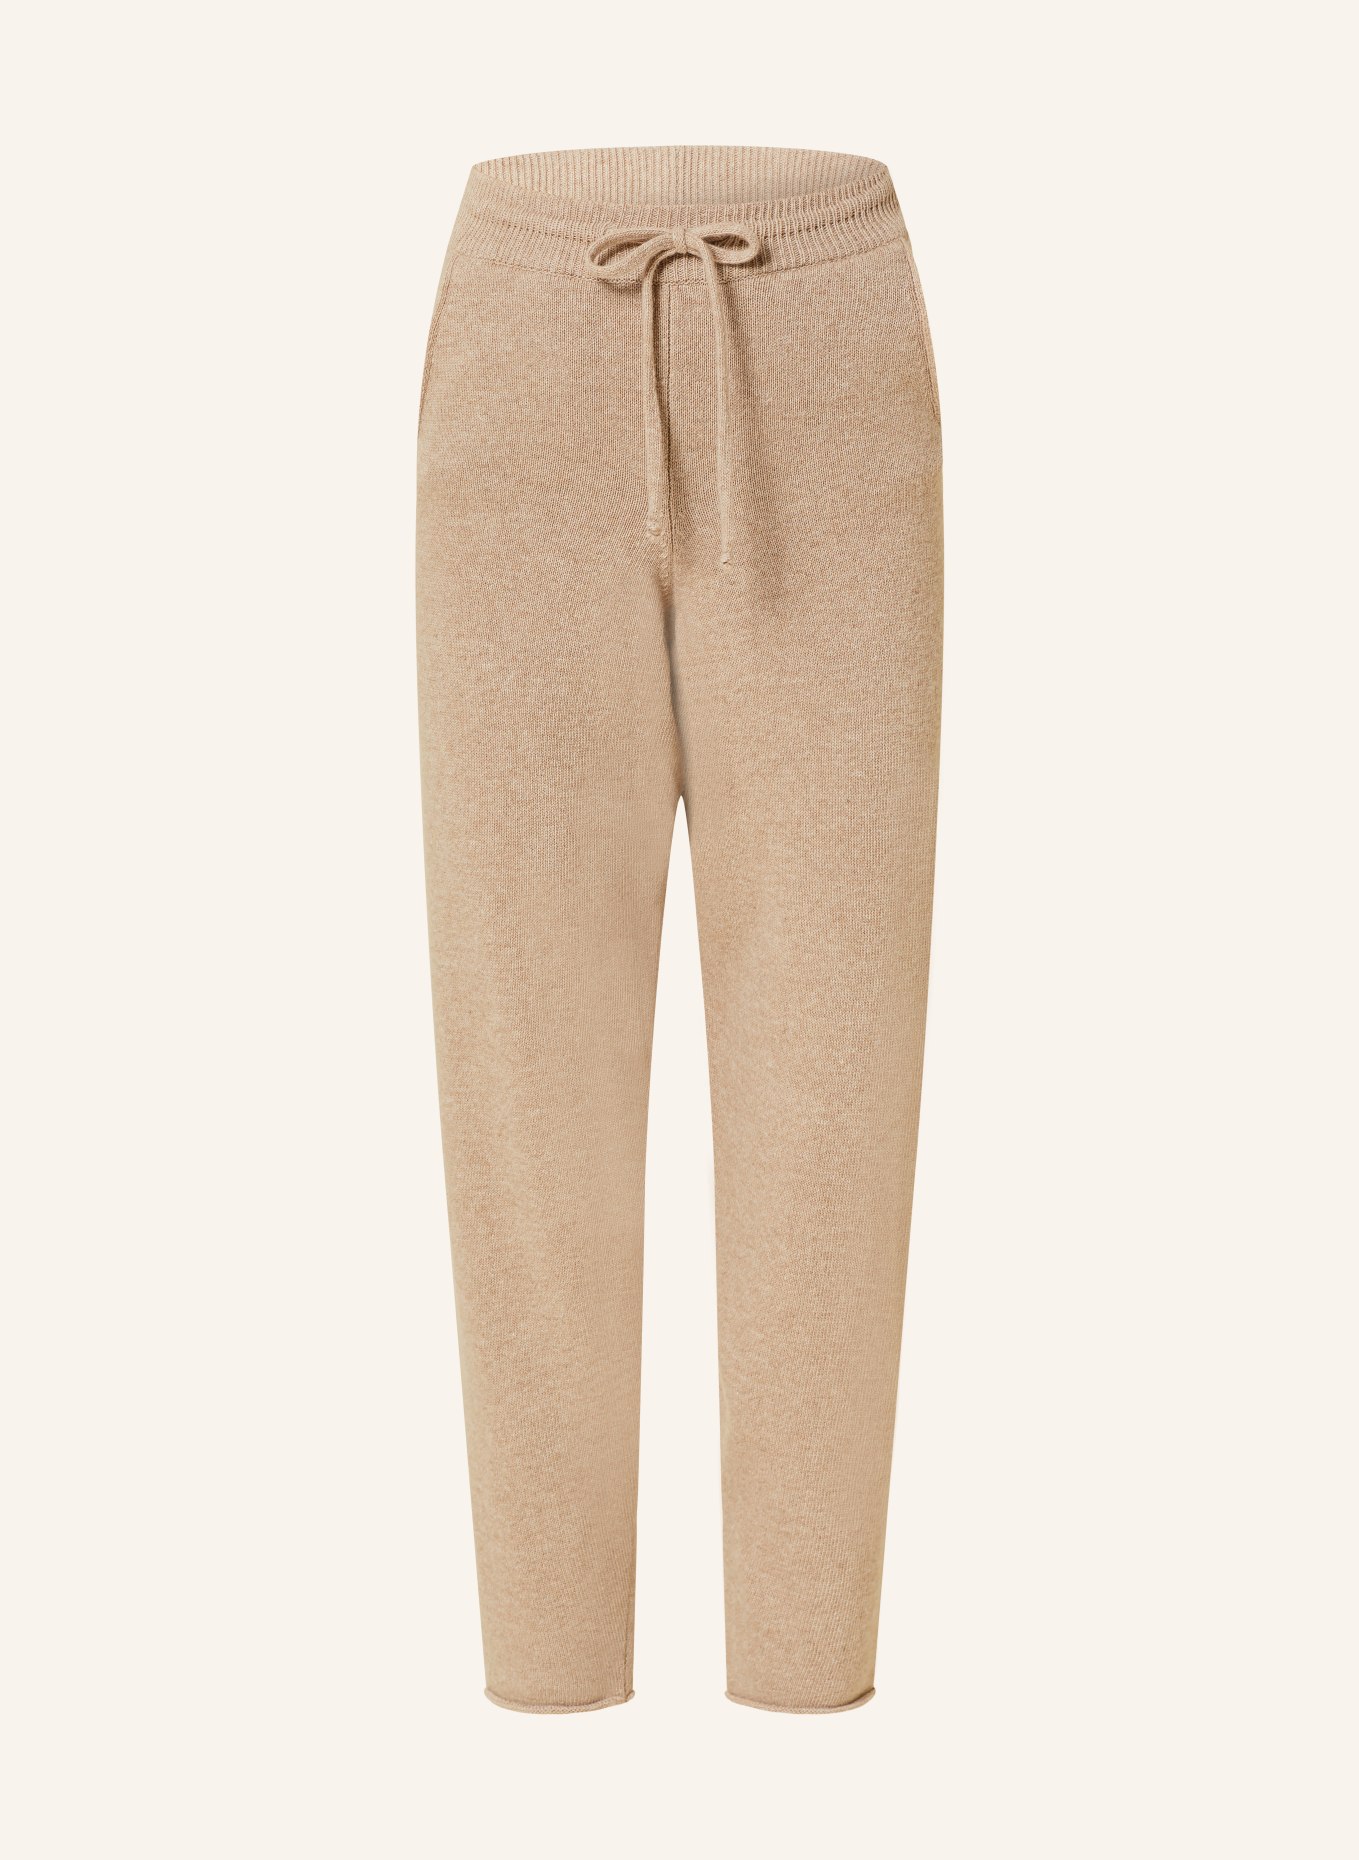 by Aylin Koenig Knit trousers JULES in jogger style made of merino wool, Color: BEIGE (Image 1)